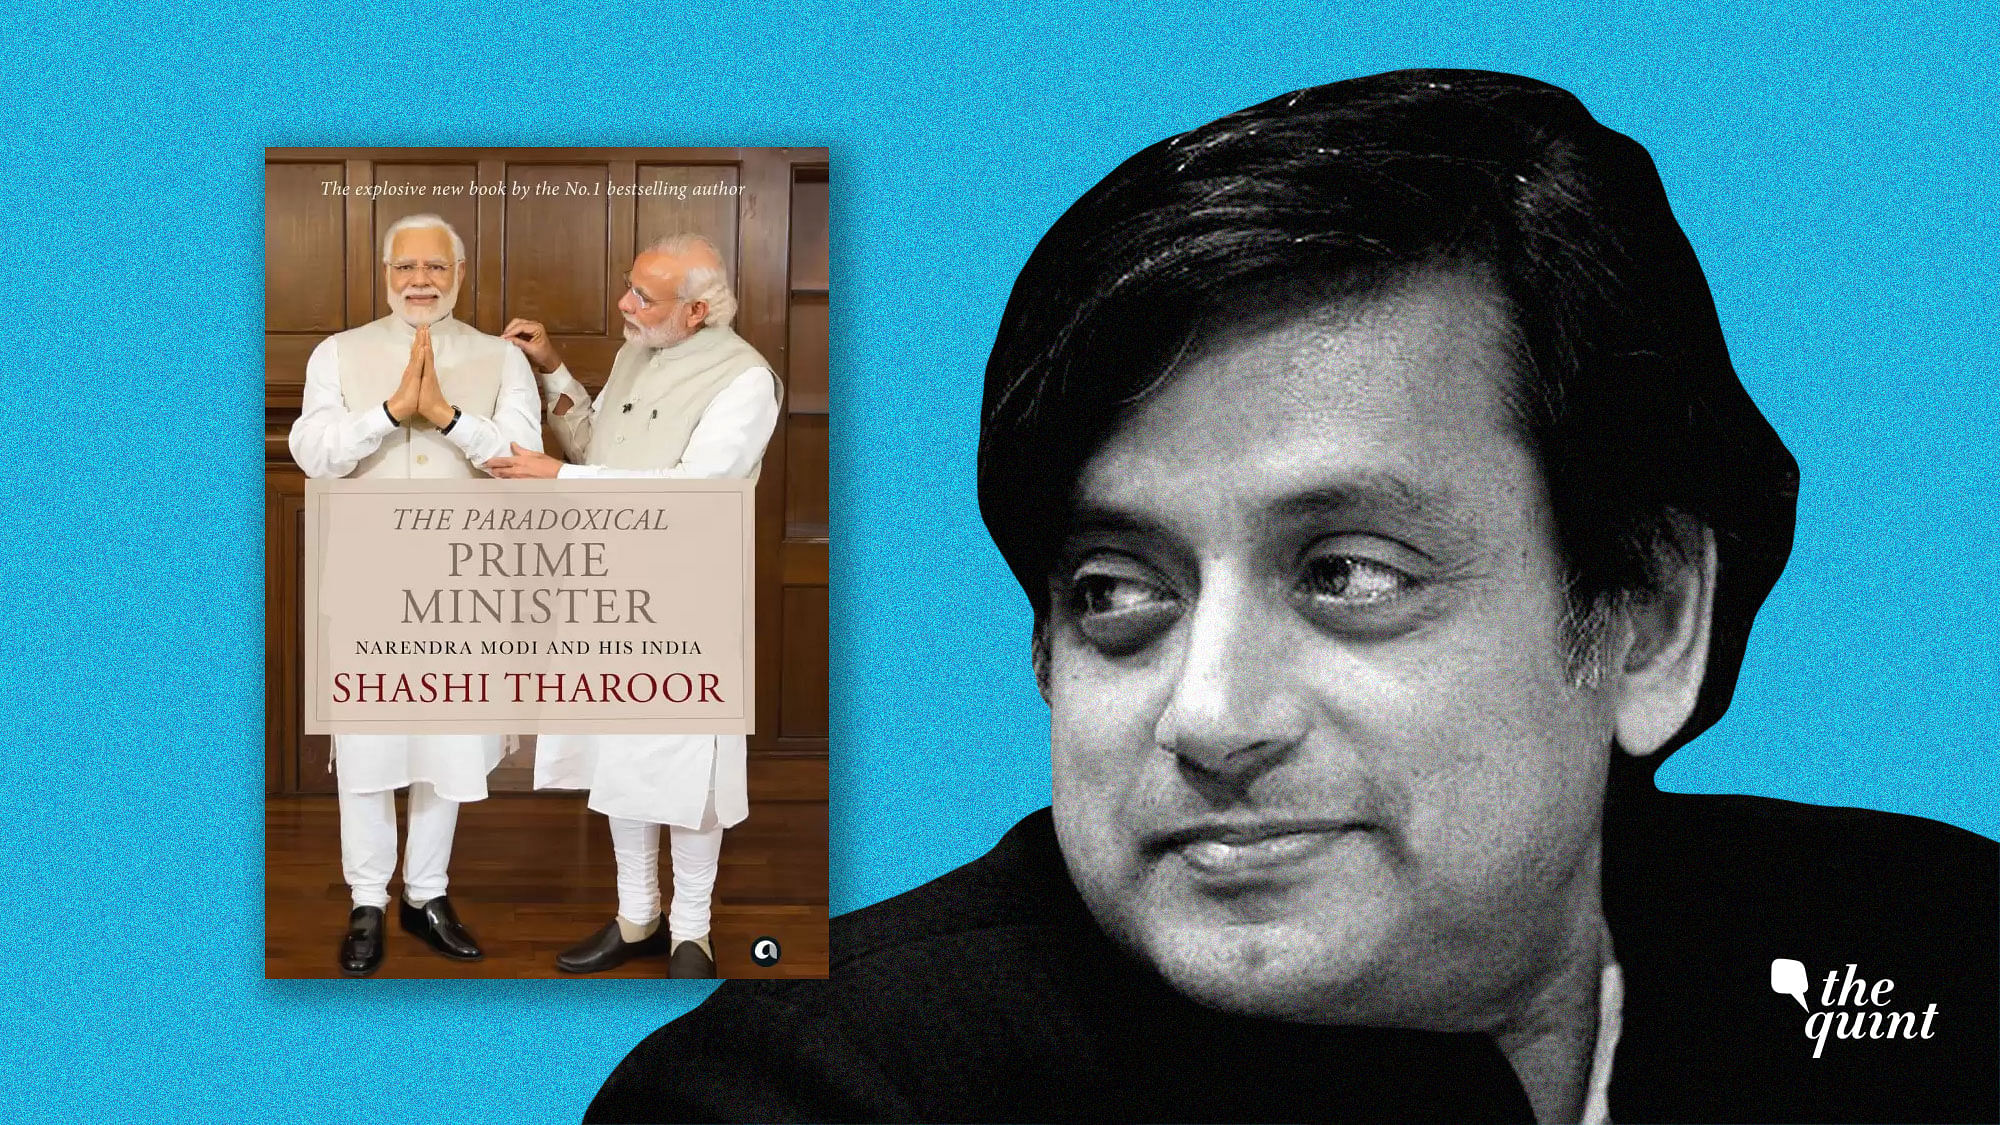 “I’m a writer. I’m a politician. Sometimes, the two do converge,” says Shashi Tharoor